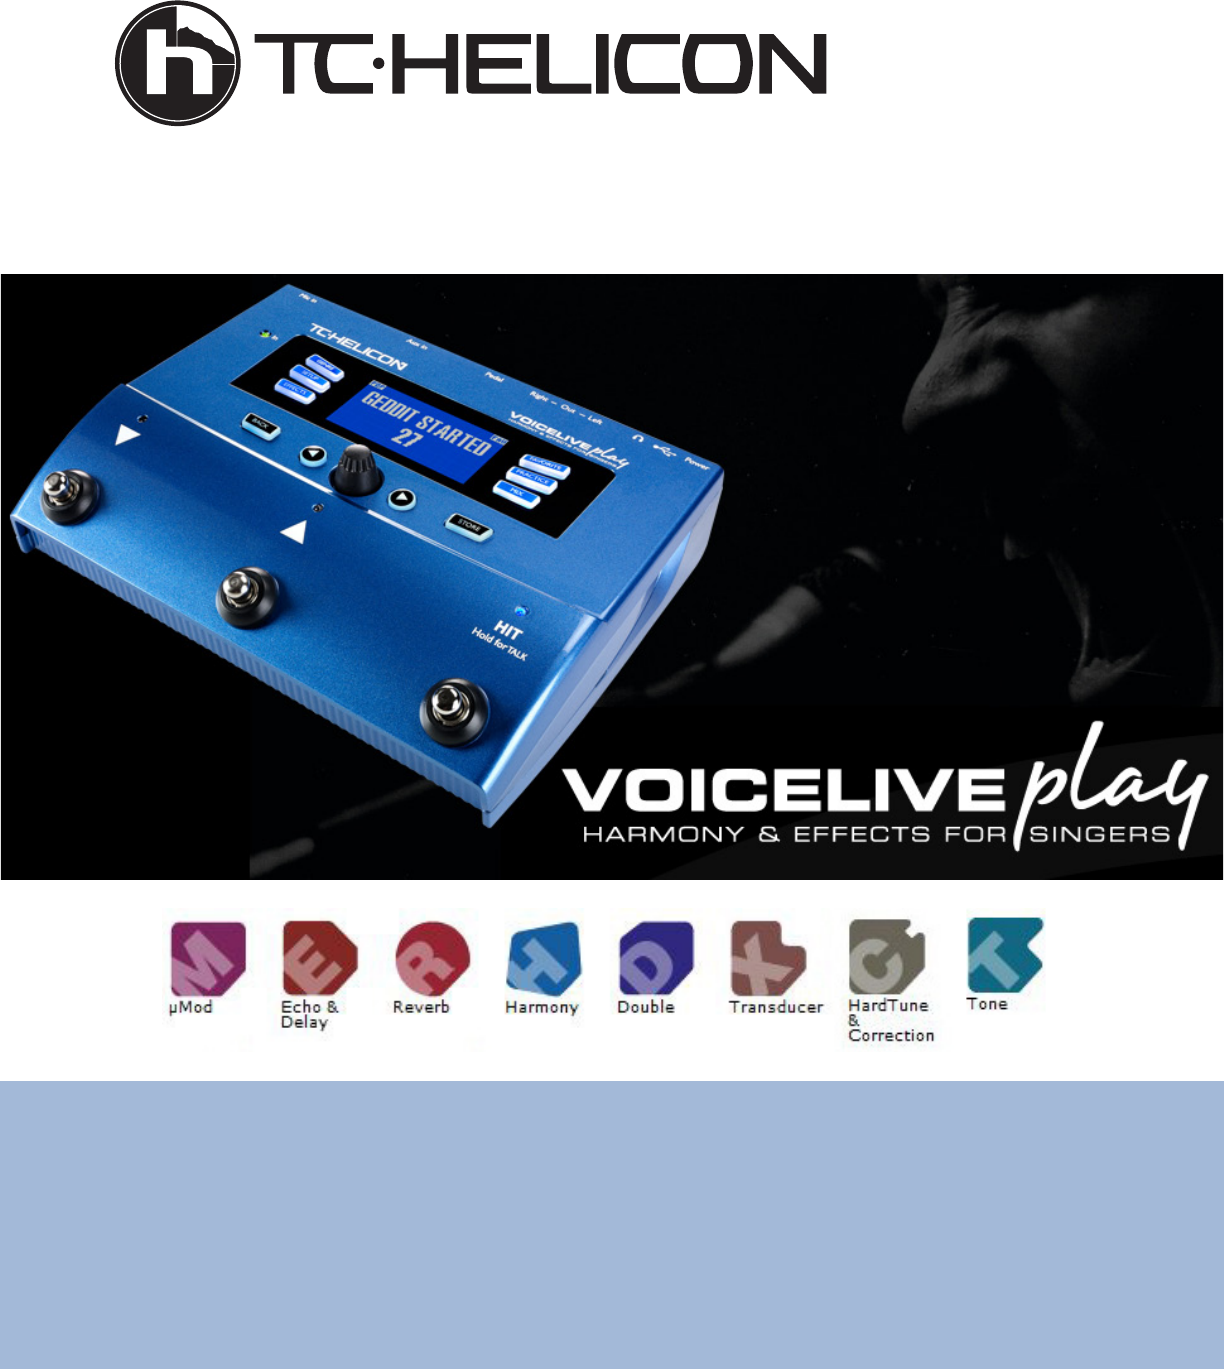 Manual Tc Helicon Voicelive Play Page 1 Of 32 English